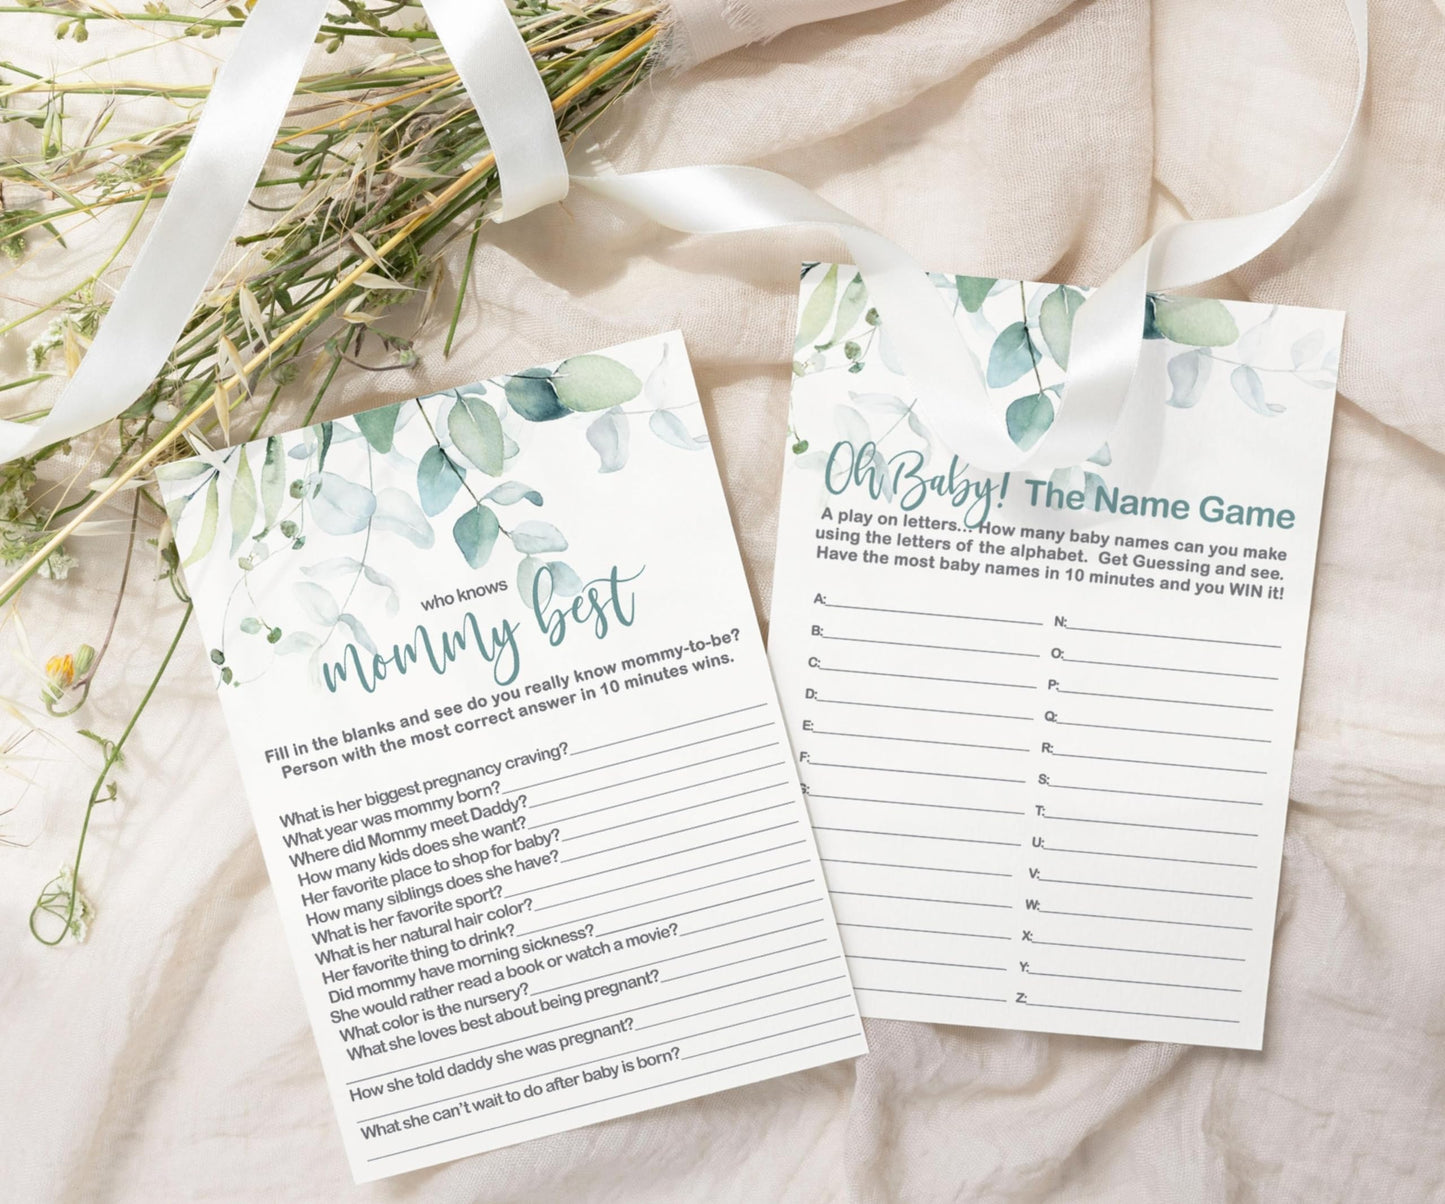 , 5x7 Doubles Sided Cards, EucalyptusPaper Clever Party